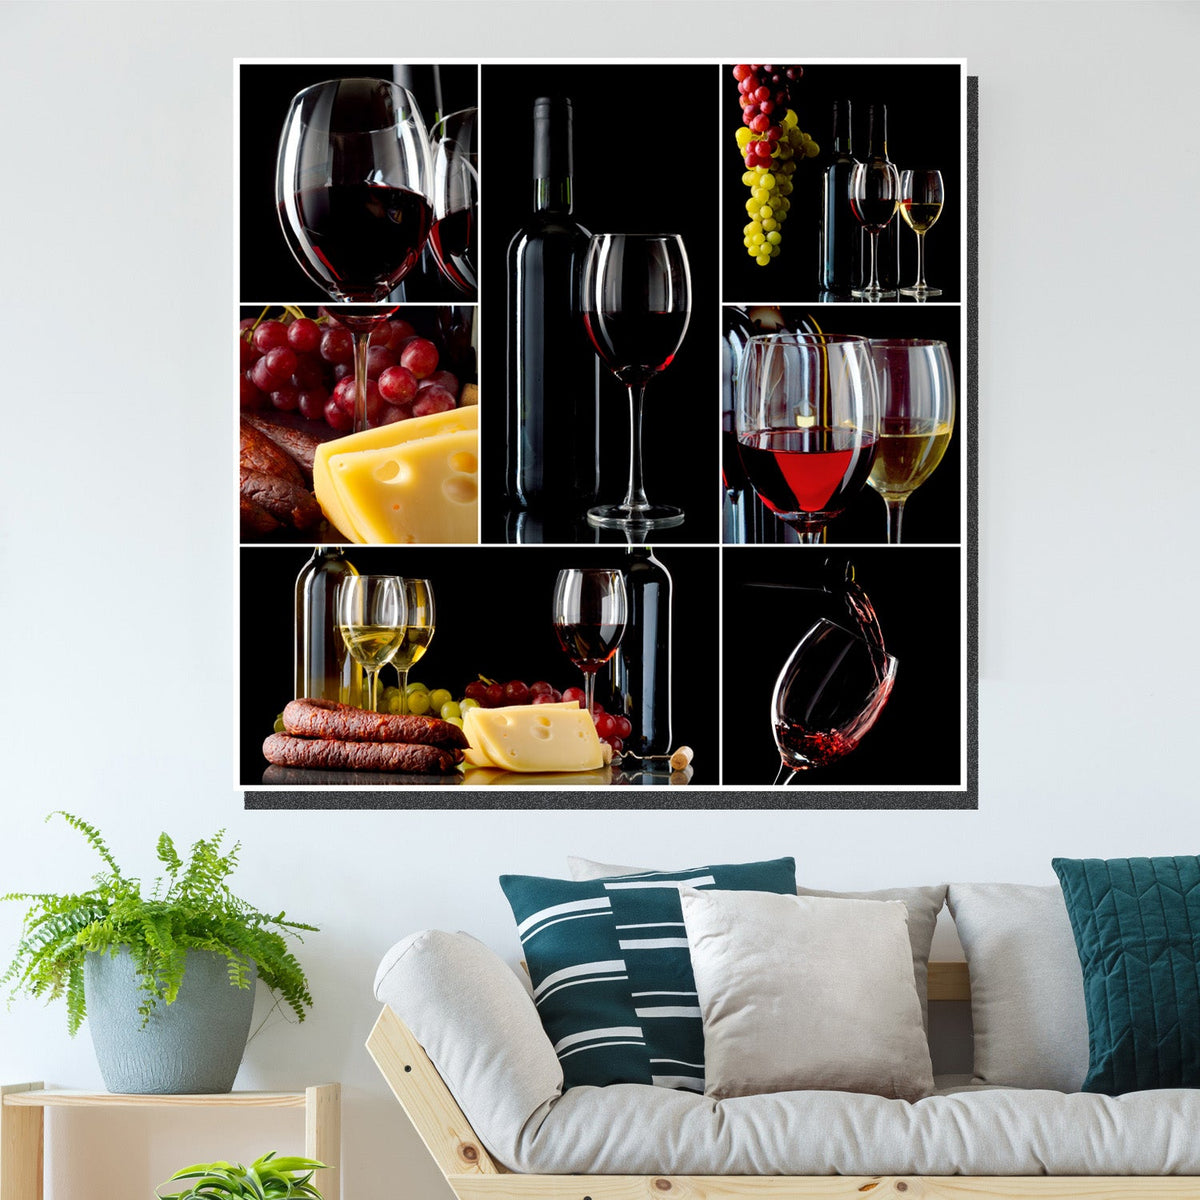 https://cdn.shopify.com/s/files/1/0387/9986/8044/products/WineGrapesandCheeseCollageCanvasArtprintStretched-2.jpg